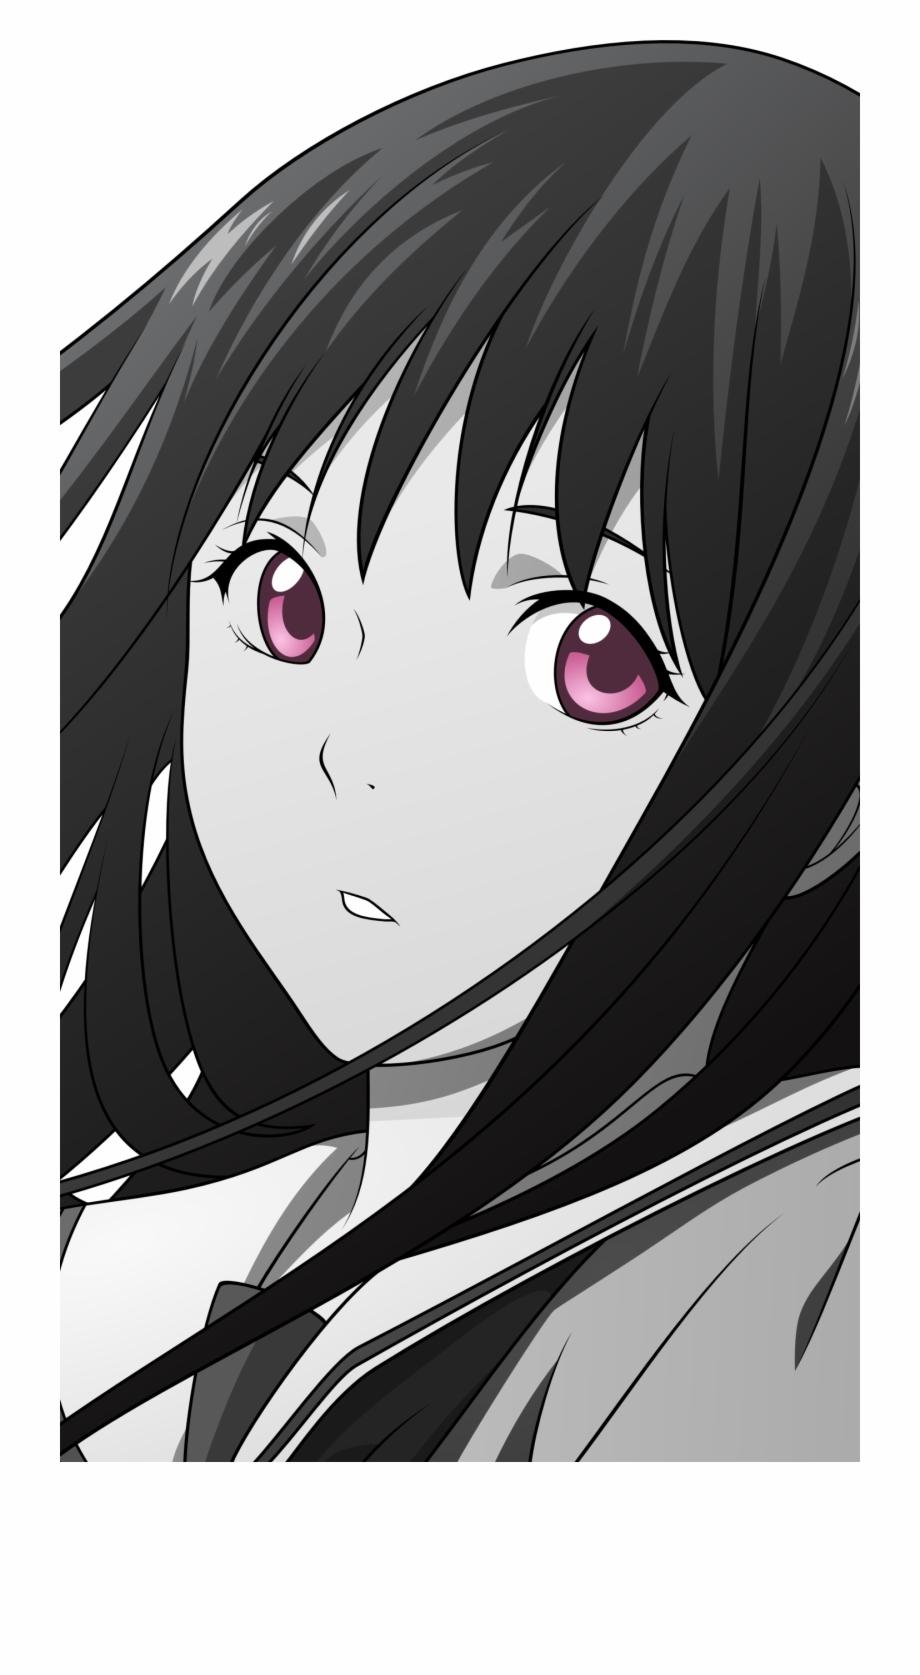 Free Anime Black And White Wallpaper, Download Free Clip Art, Free Clip Art on Clipart Library